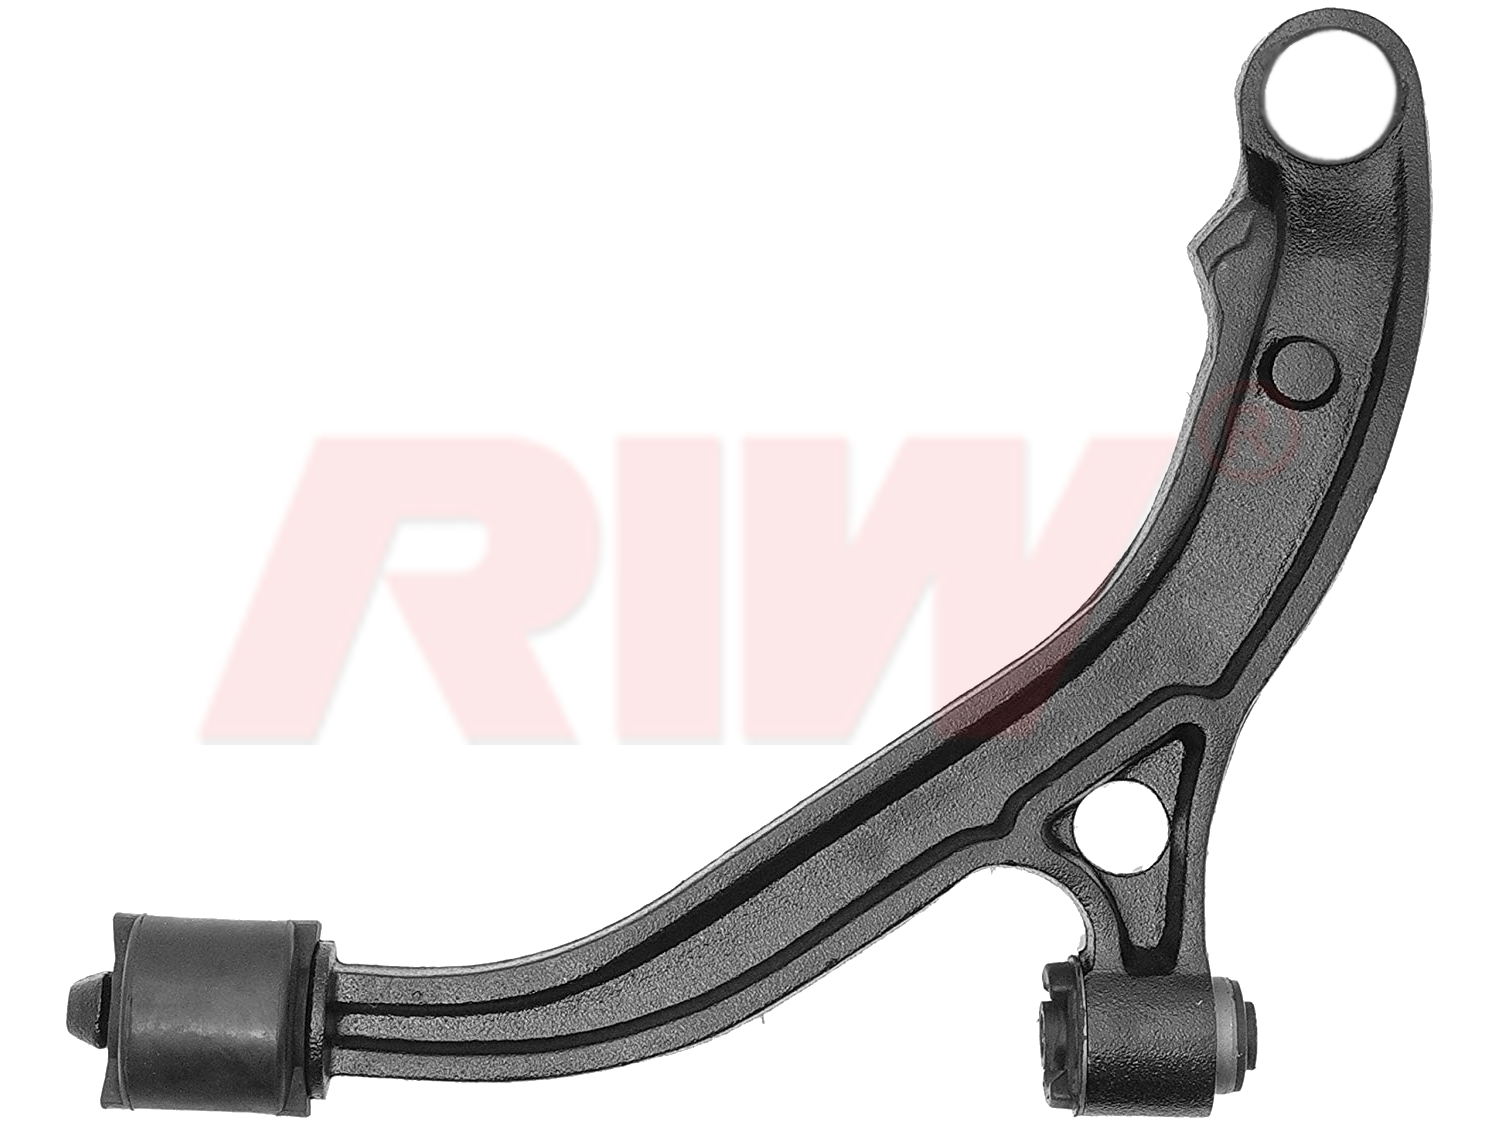 PLYMOUTH GRAND VOYAGER 1995 - 2001 Control Arm